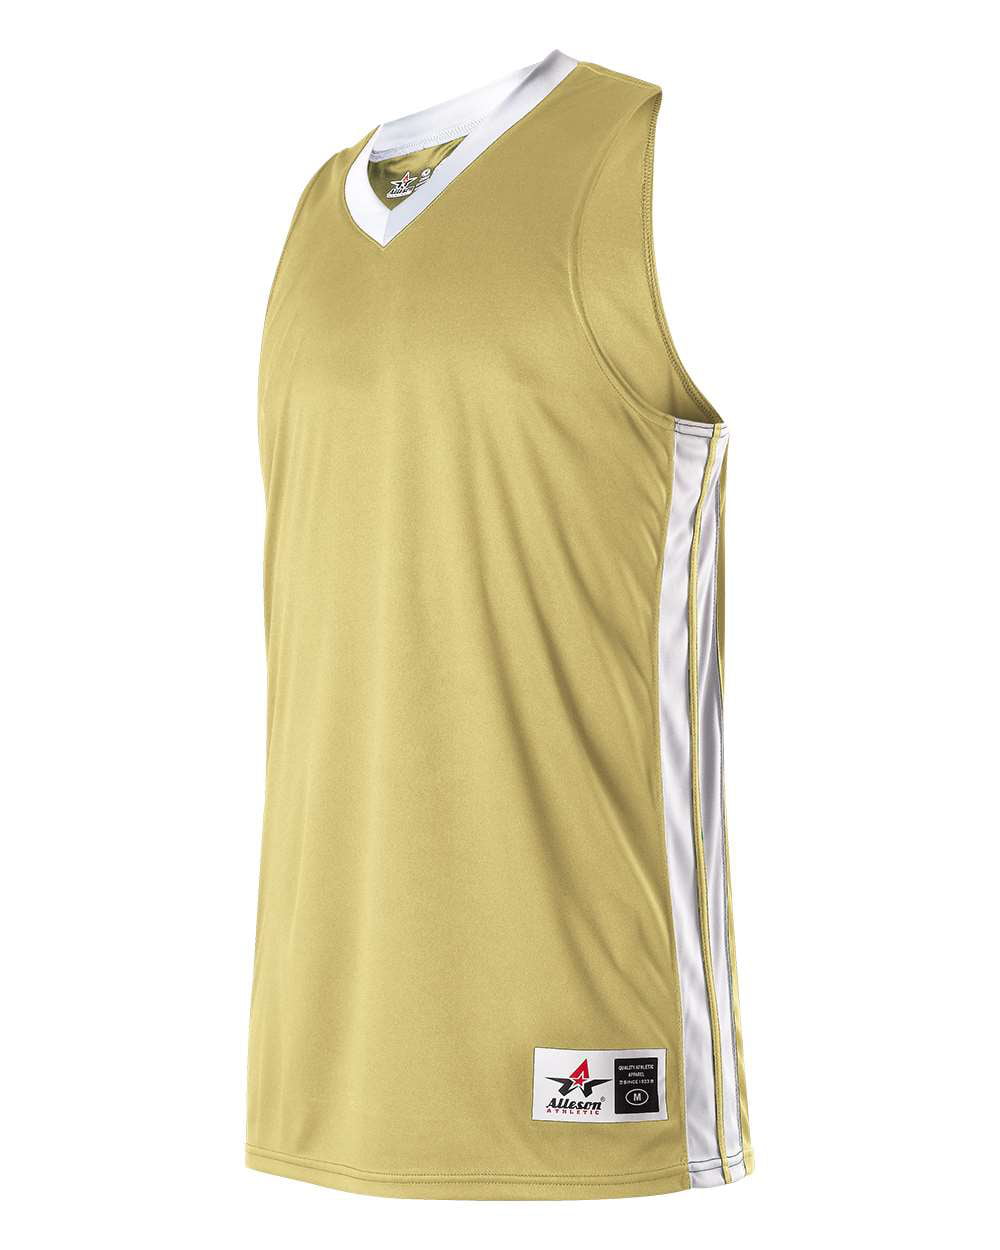 basketball jersey gold color